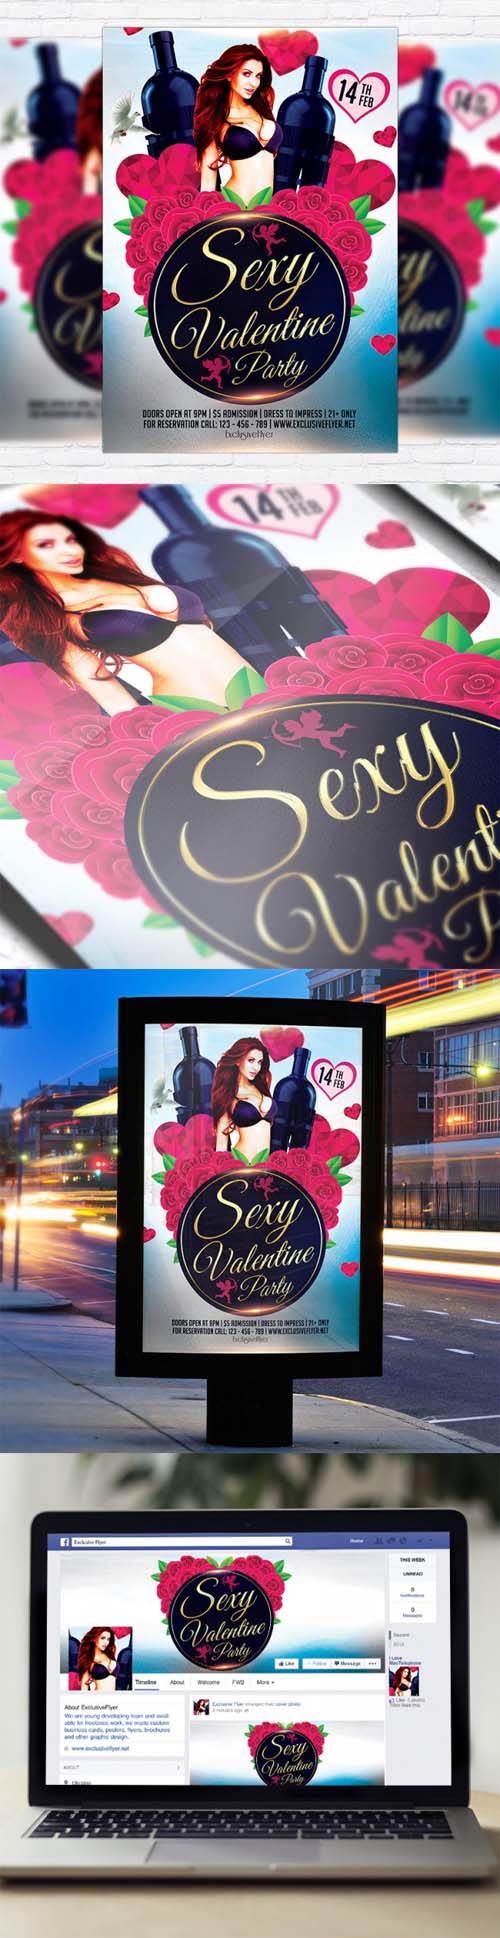 Flyer Template - Sexy Valentine + Facebook Cover